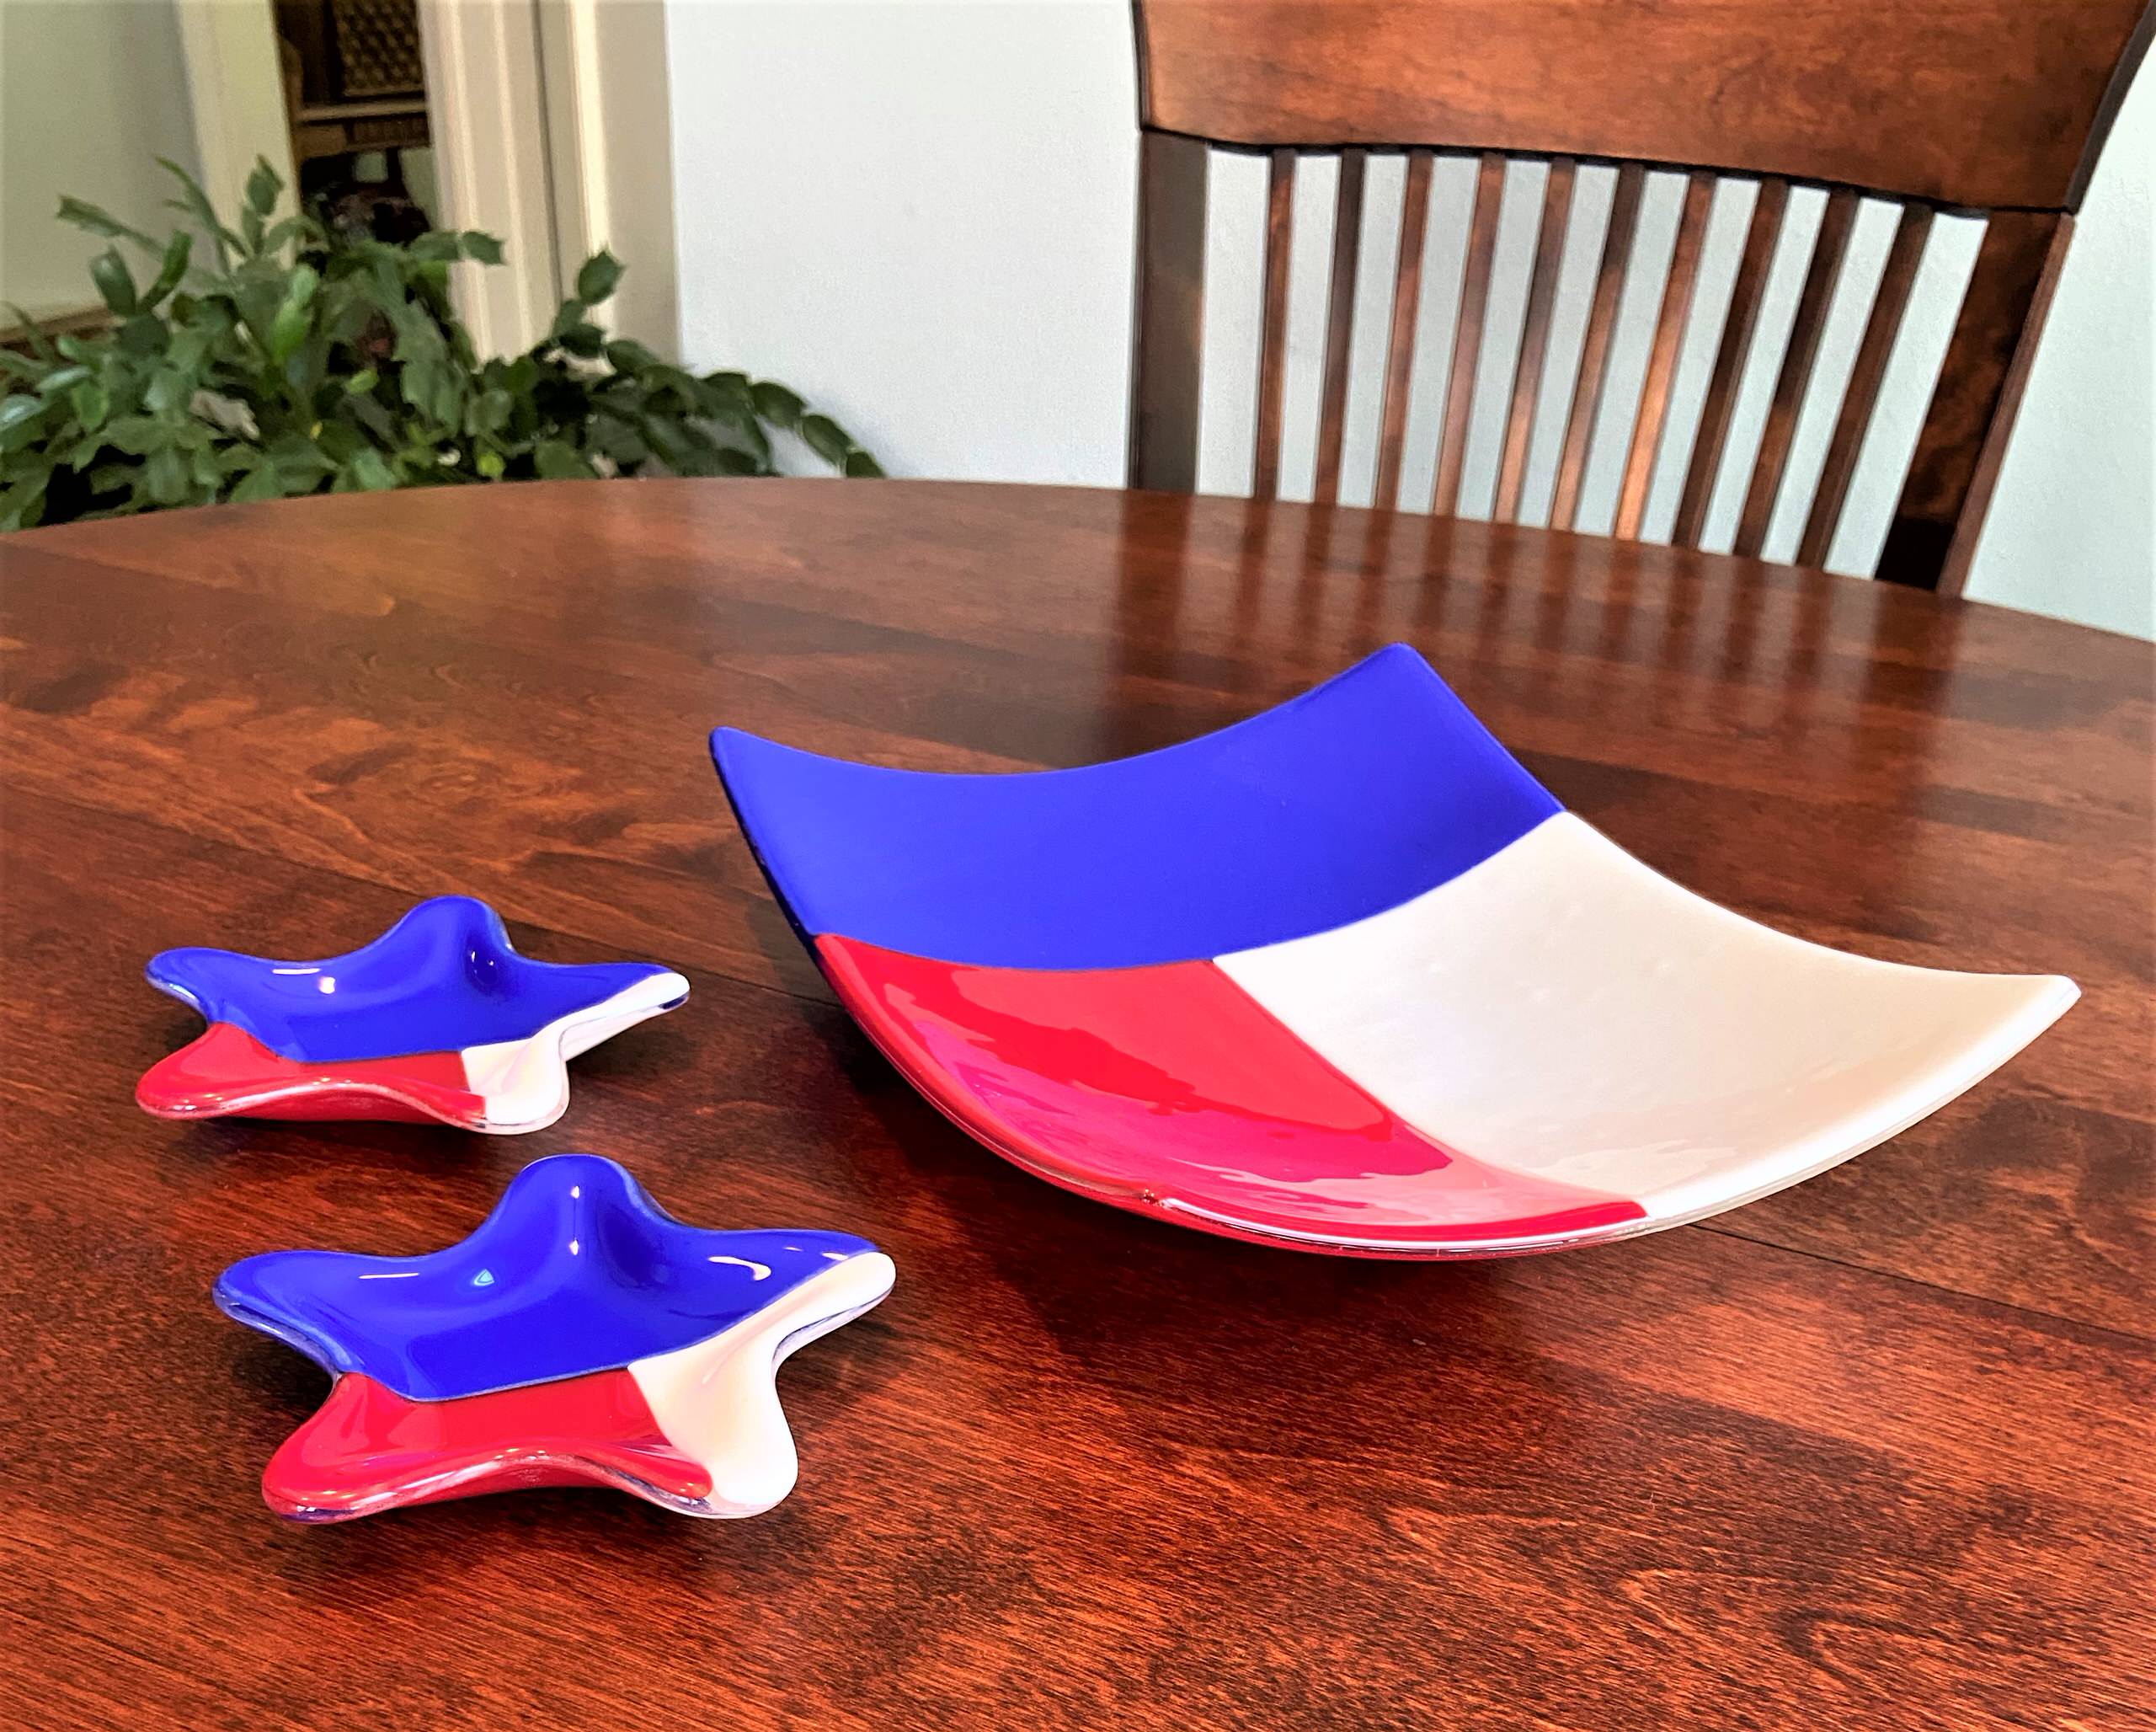 8" x 10" Large Texas flag platter and 2 star any-use 4.5" dishes - set or separately